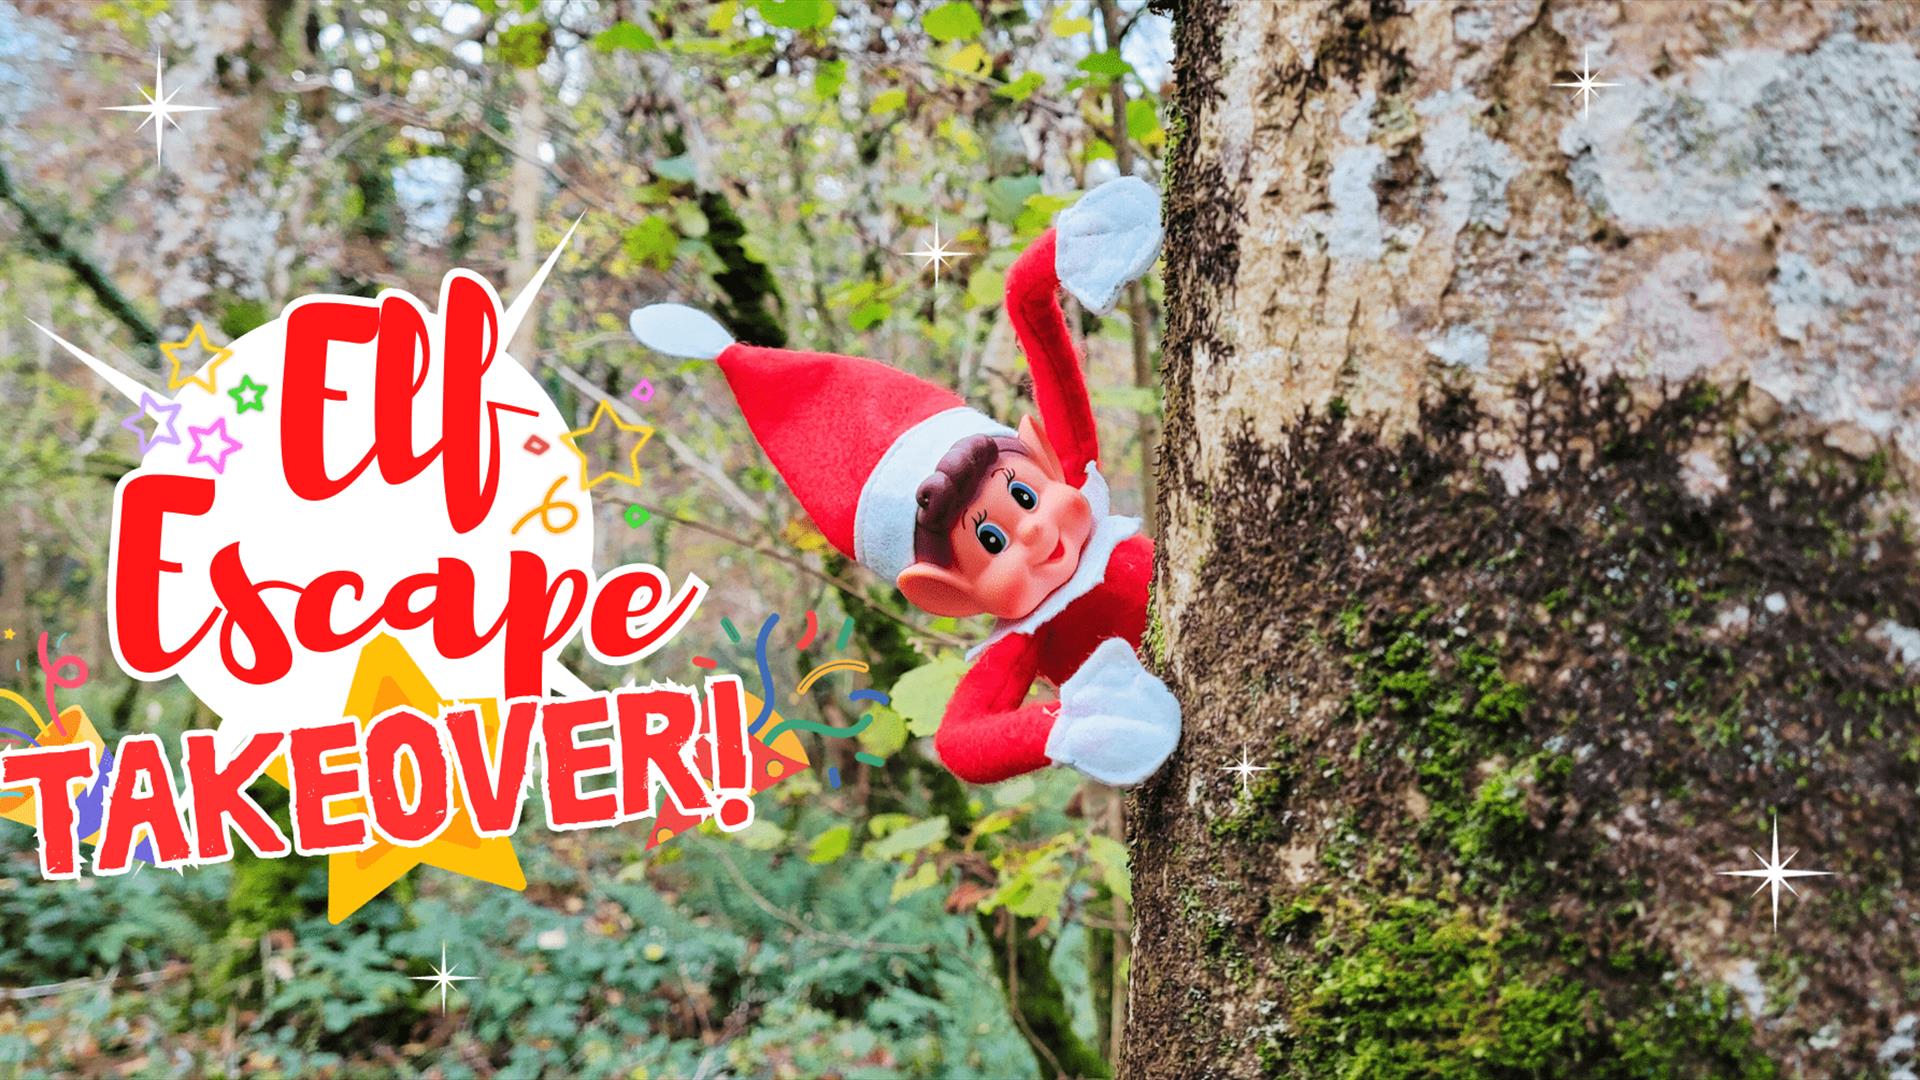 A fun Christmas Elf experience at the Marble Arch Caves for families